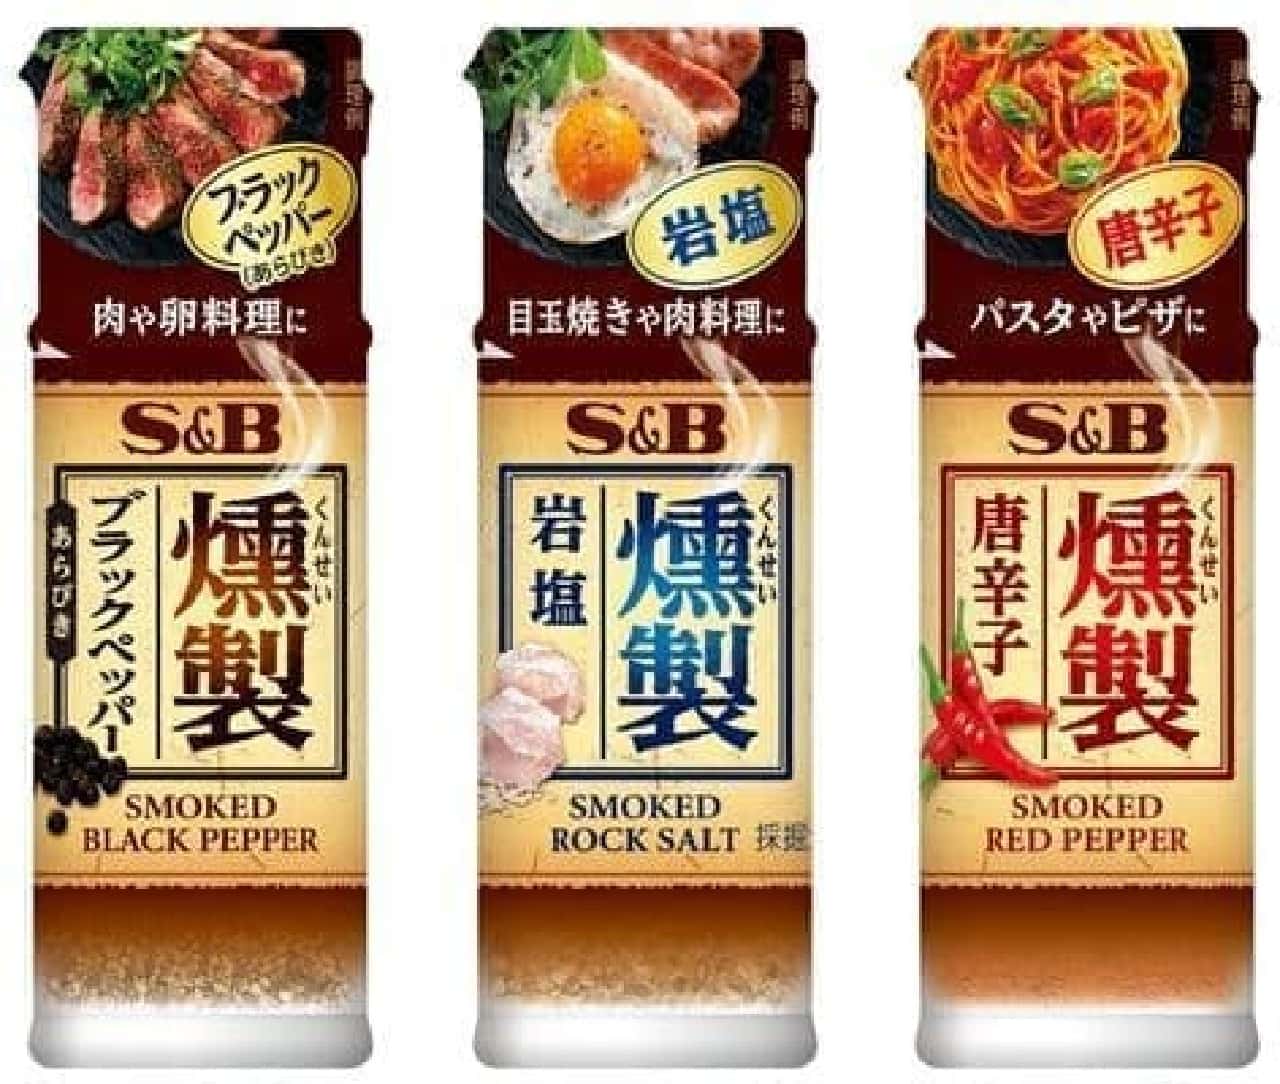 S & B Foods "Smoked Spices" Series